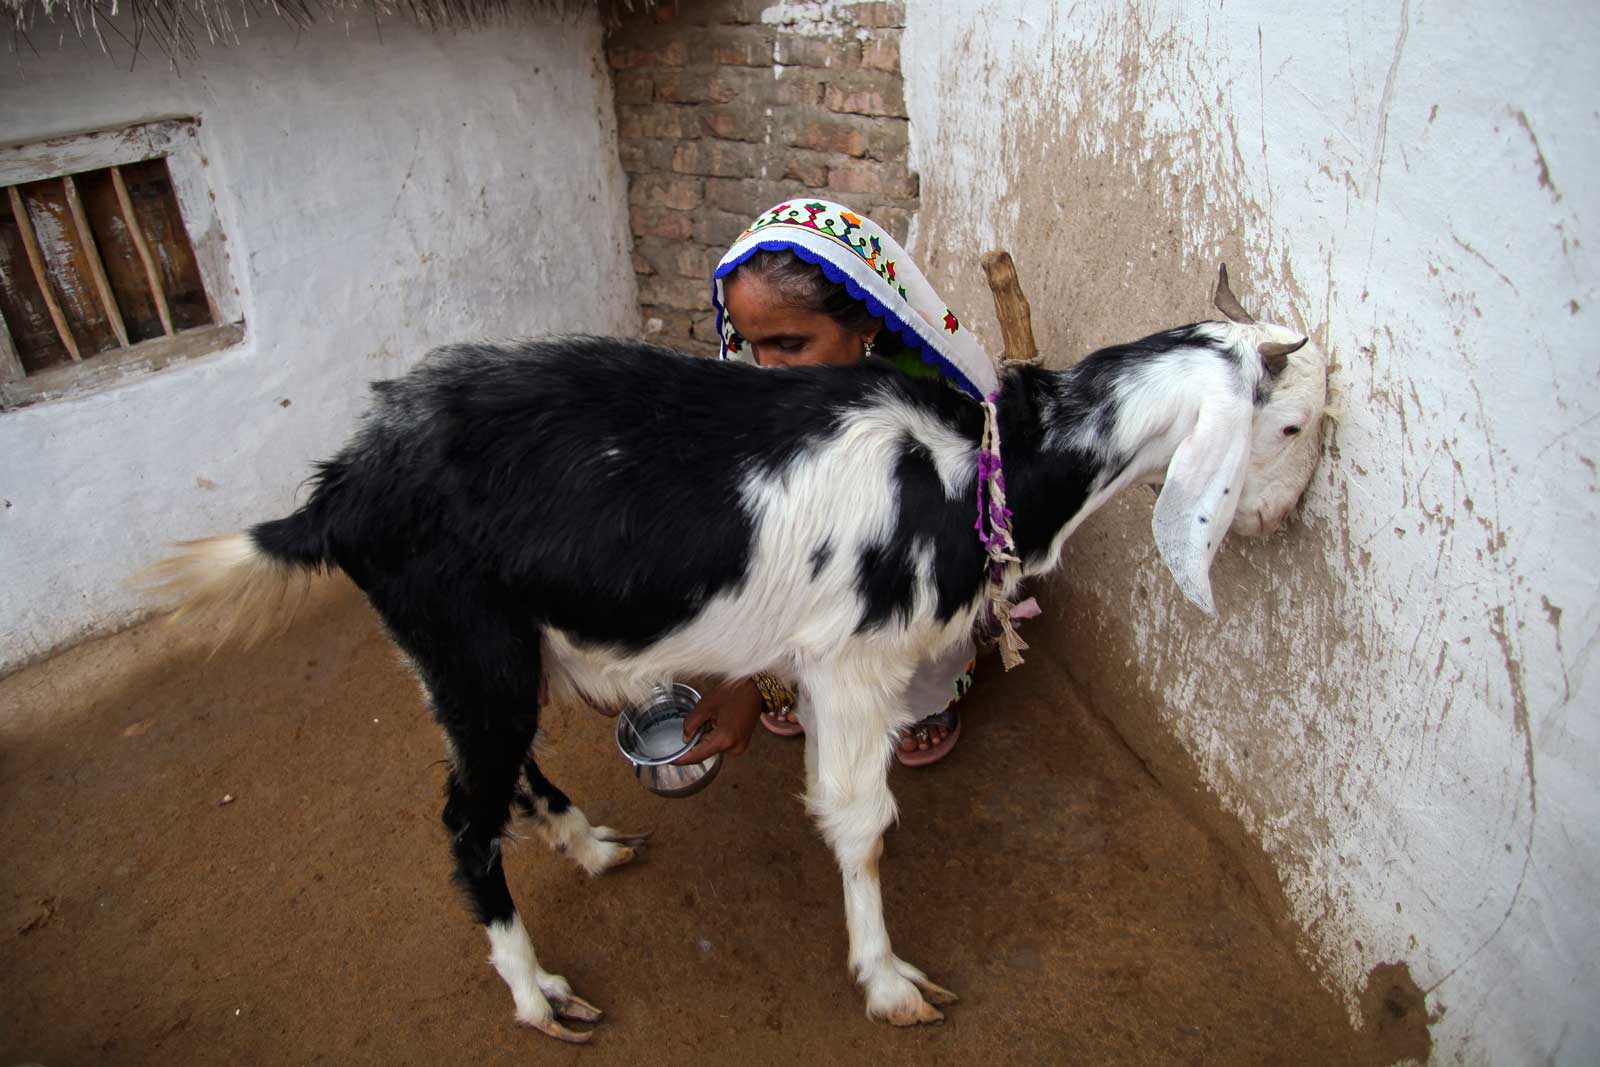  Milking the family goat is part of Bai’s early morning routine. Pakistan’s 100,000 Lady Health Workers are married women who must balance the daily responsibilties of running a household with those of a community health worker.